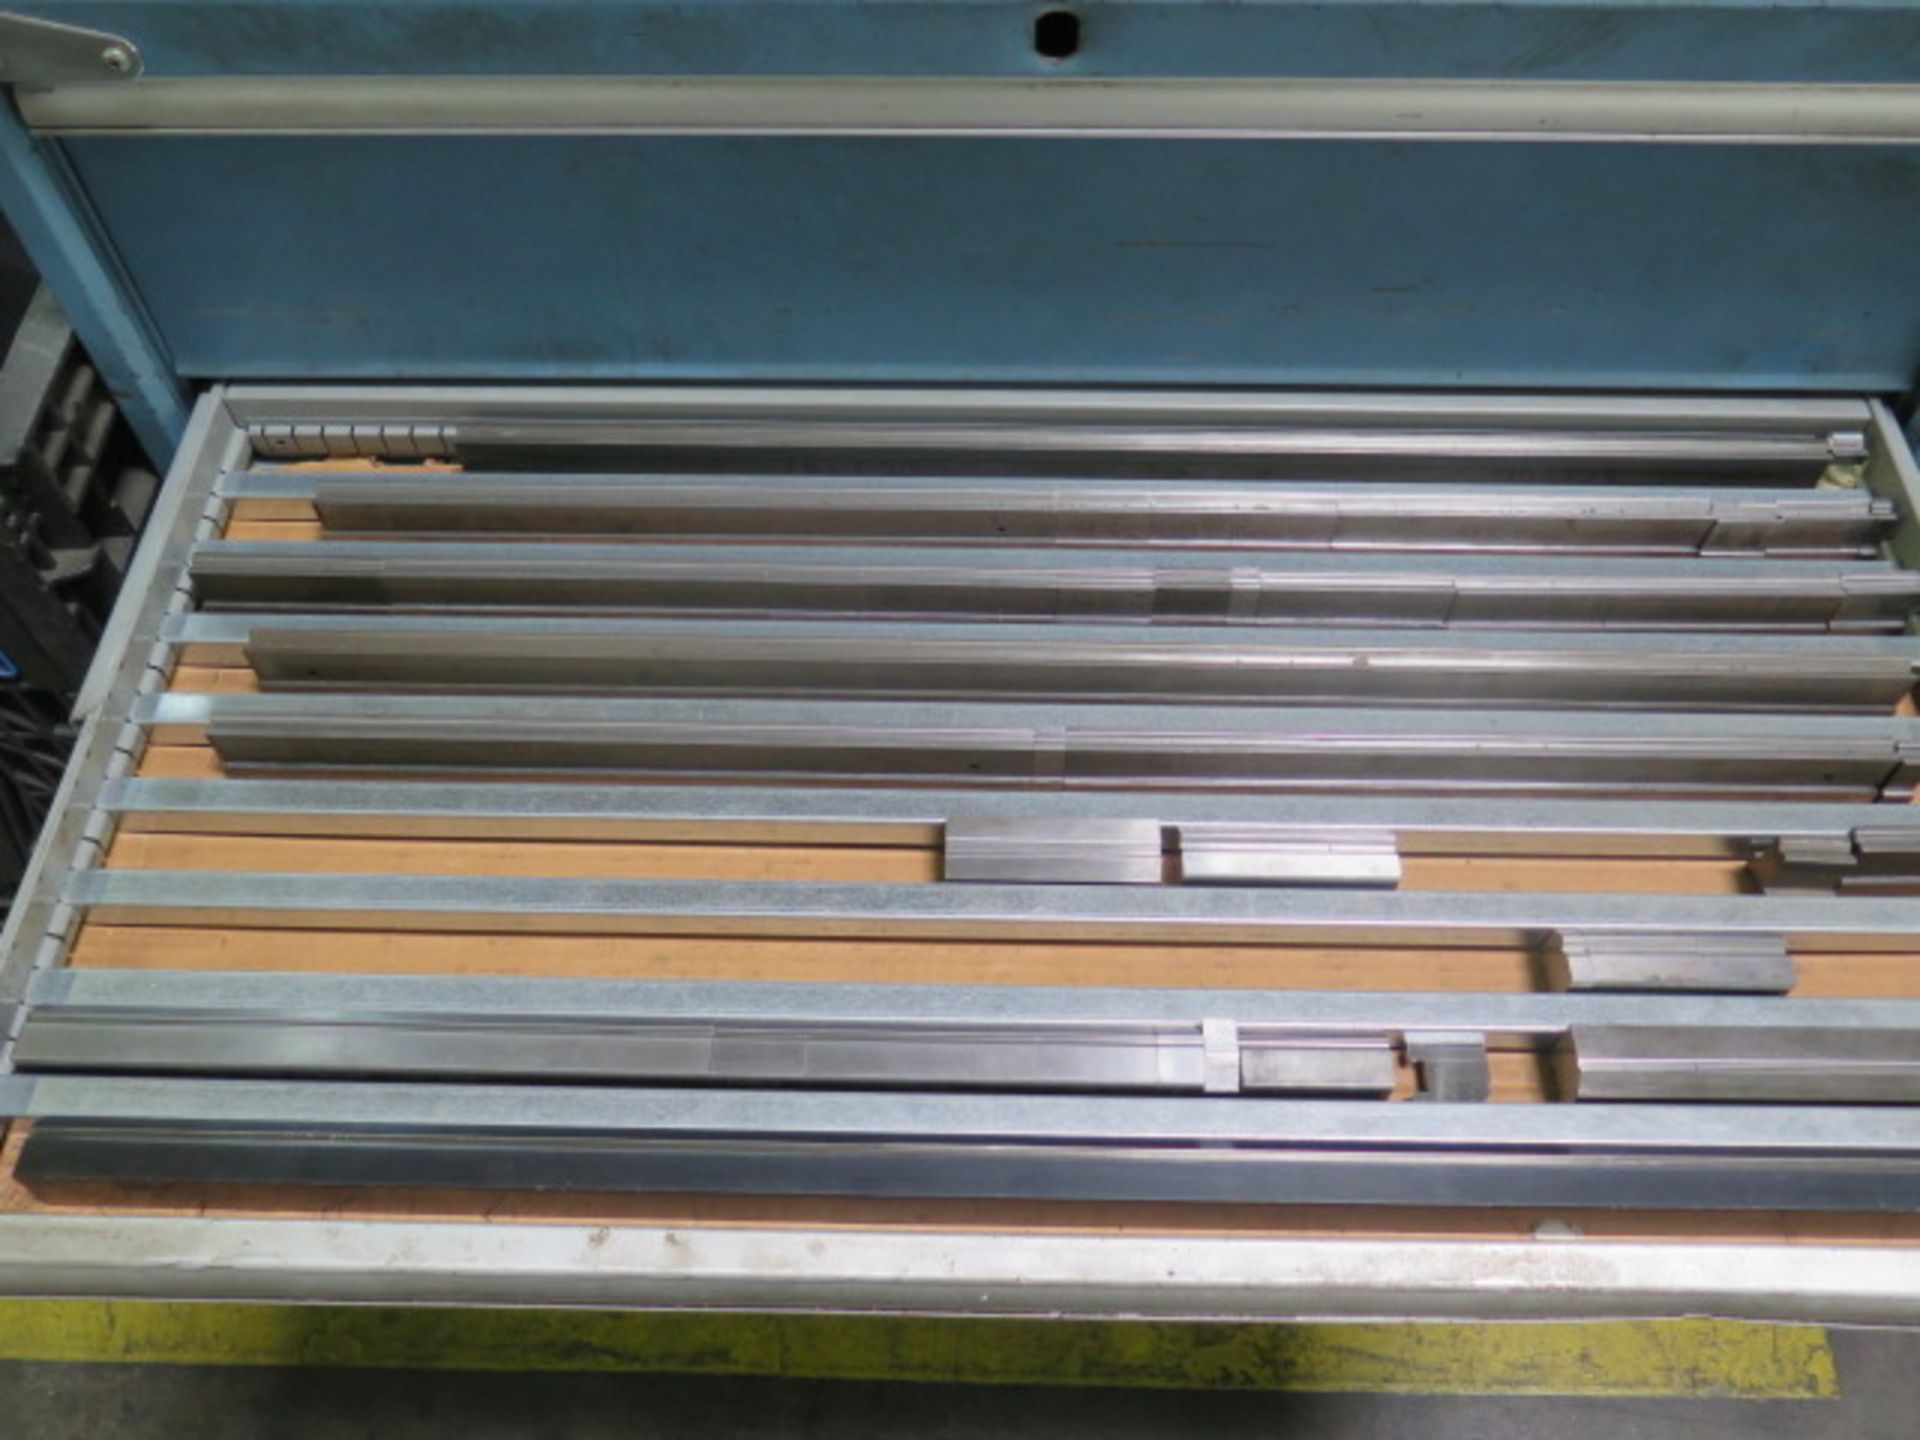 Amada Press Brake Tooling w/ Wilton Rolling Tooling Cabinet (SOLD AS-IS - NO WARRANTY) - Image 5 of 13